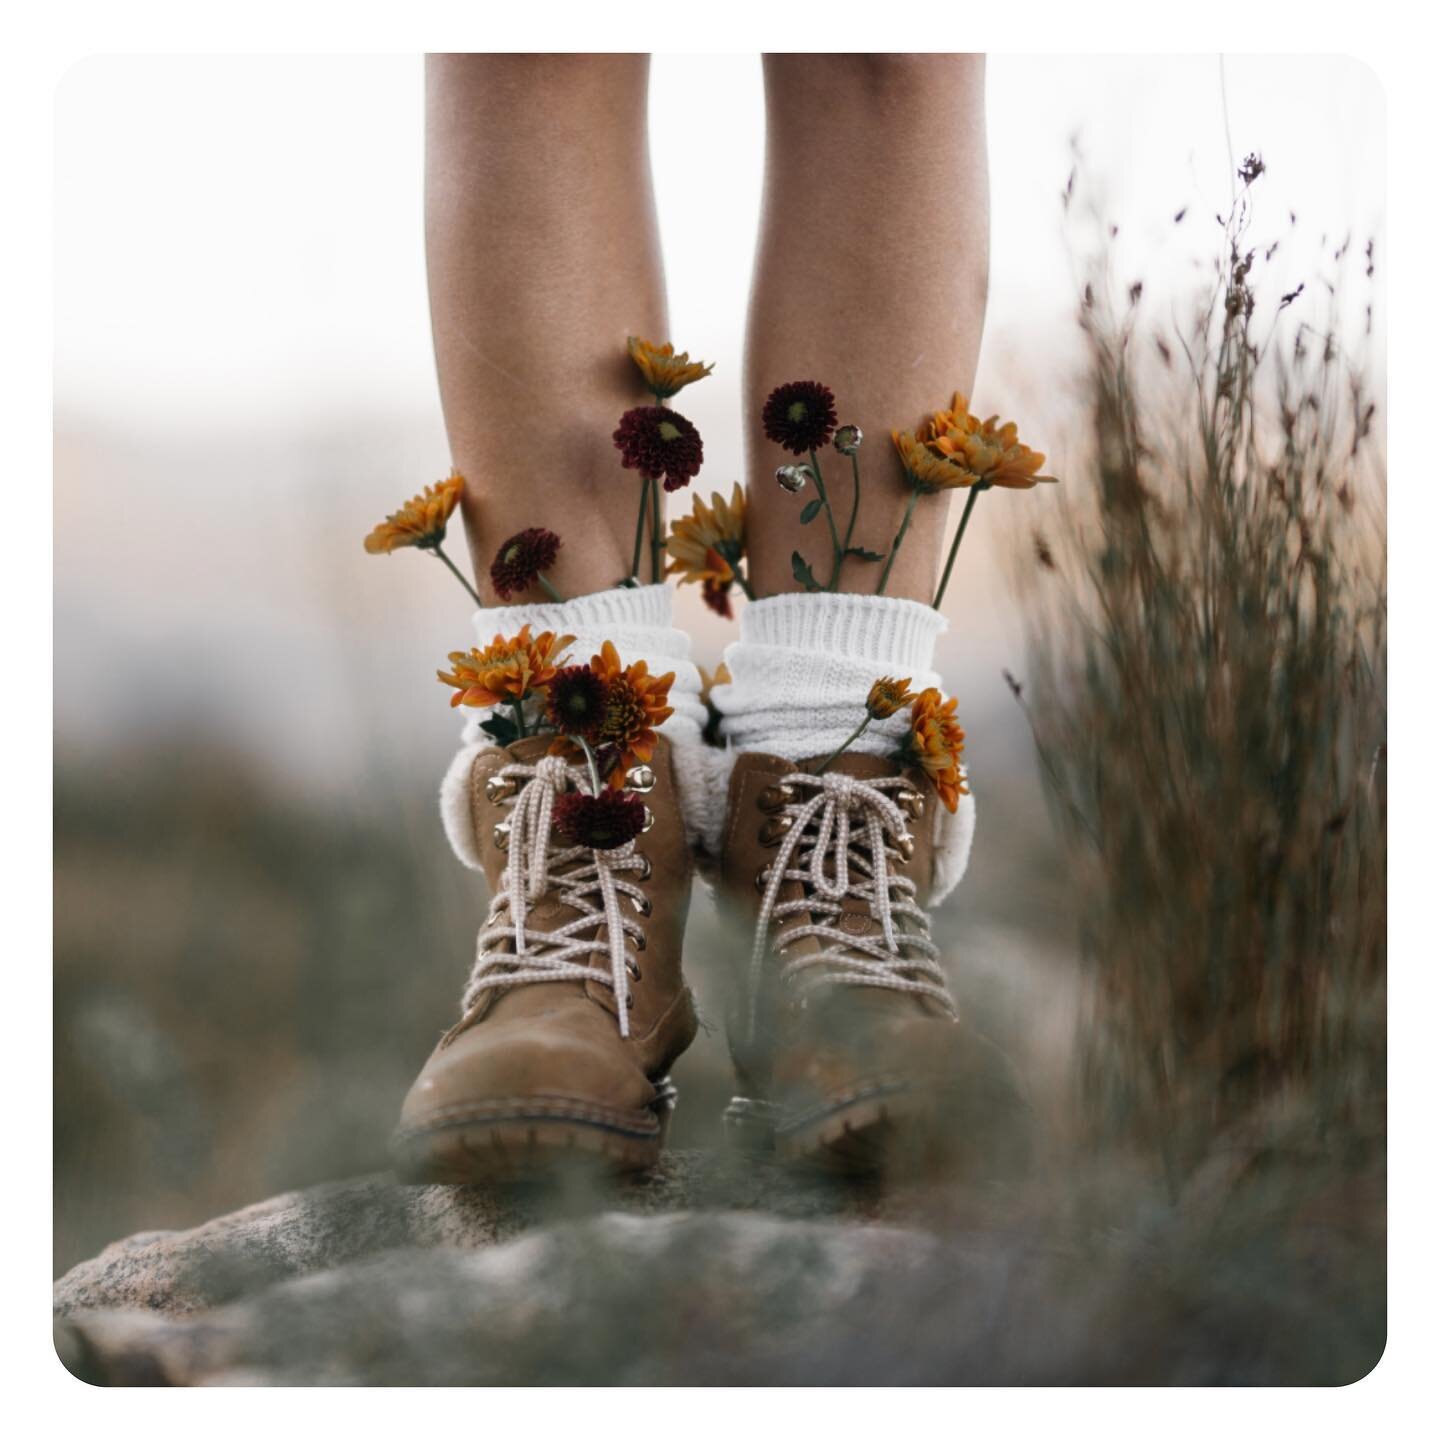 No matter what adventures your feet take you on, they deserve some love. Treat them to our services at Foot Bar to thank them for all they do for you. Call today to schedule your next appointment at 503.224.0292 or schedule online at footbarpdx.com

